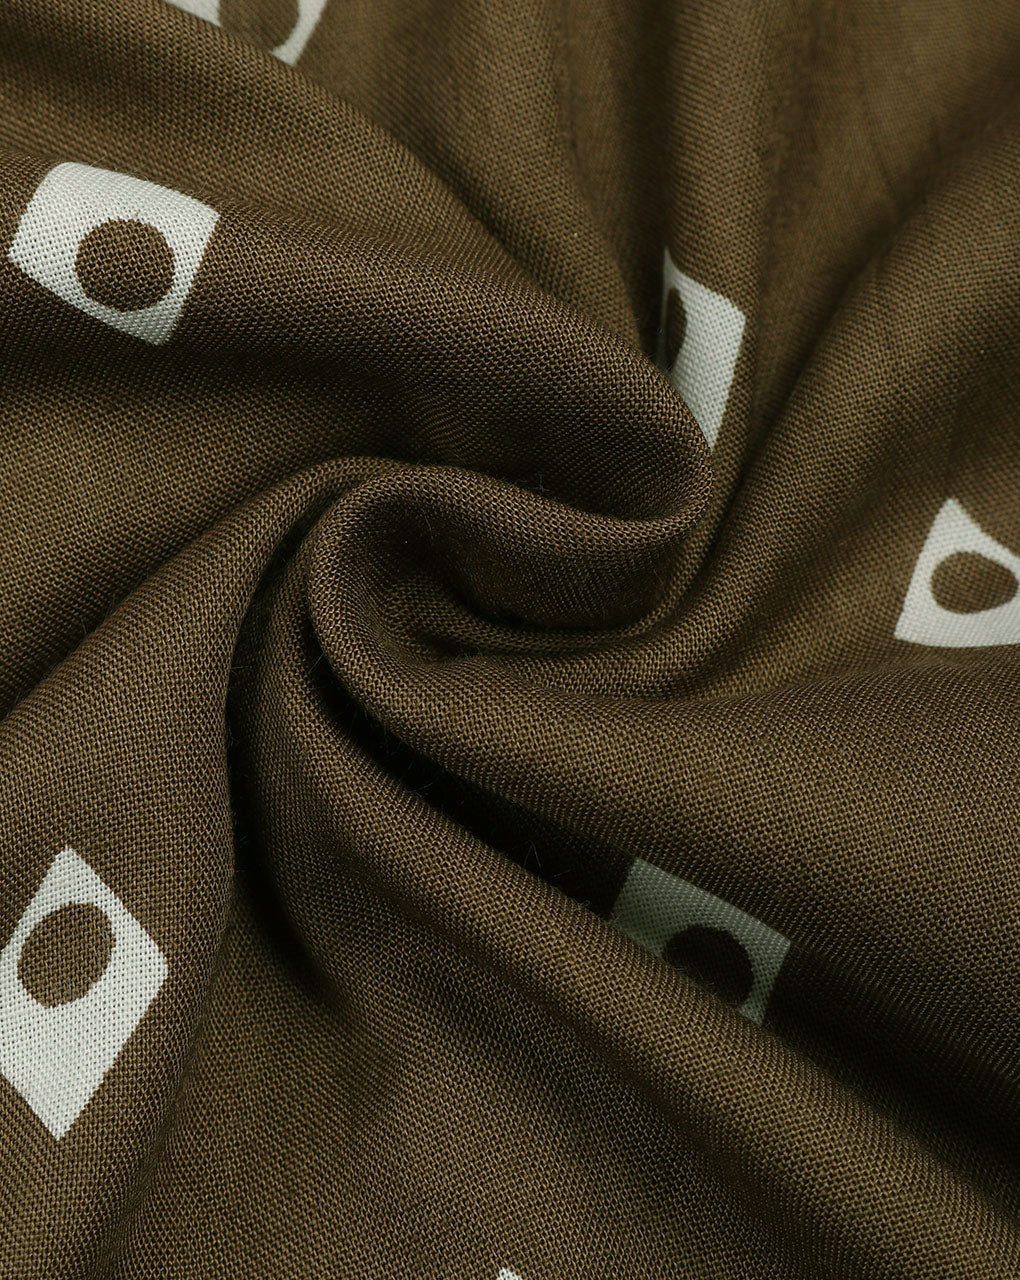 Olive Green White Geometric Discharge Rayon Fabric - Fabriclore.com